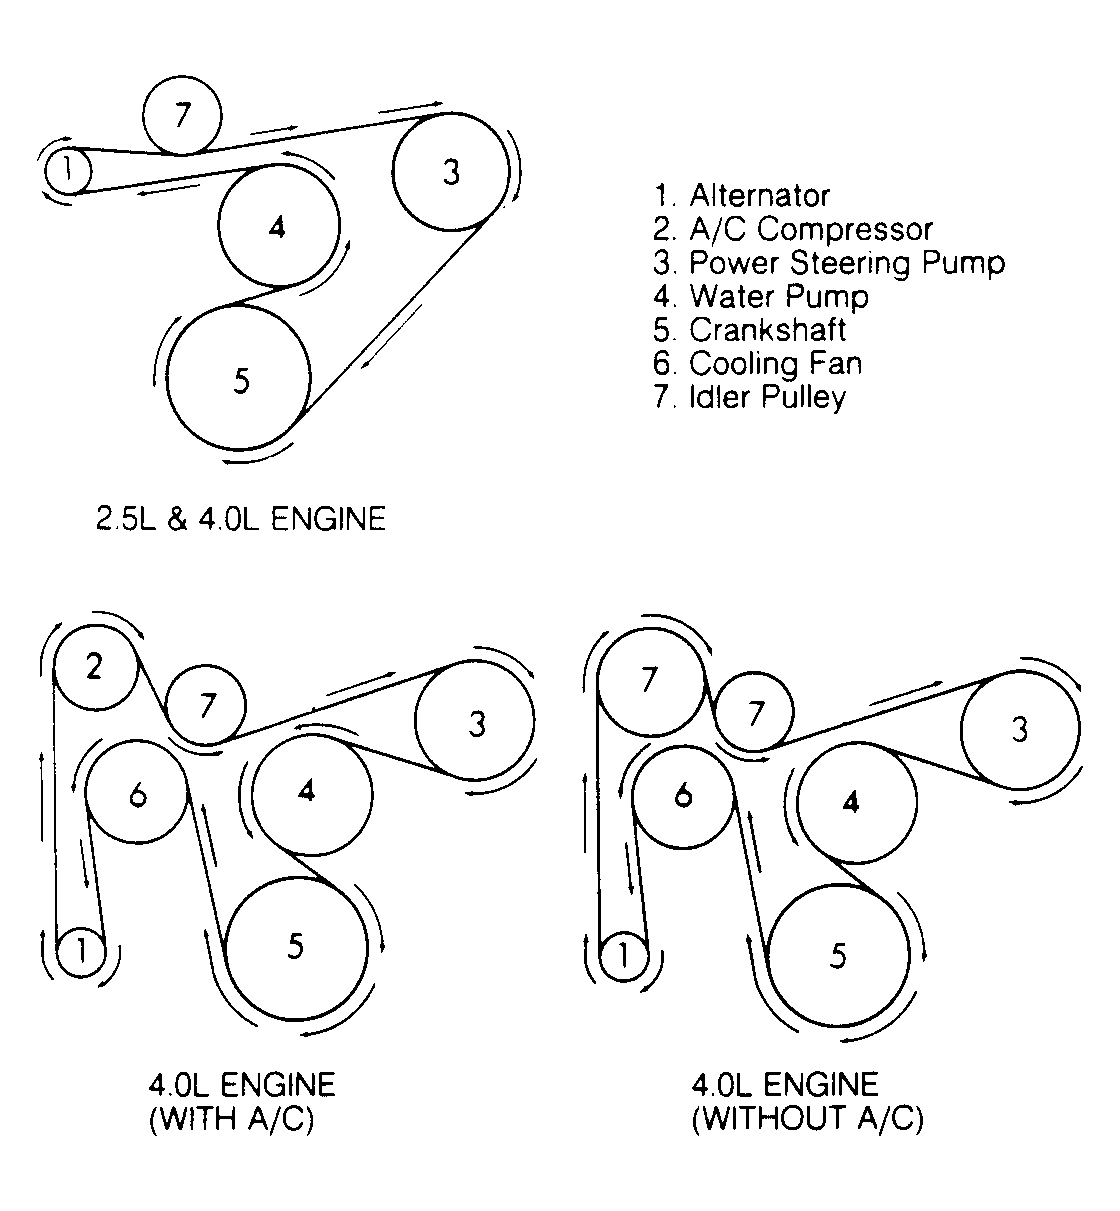 1991 Jeep Grand Wagoneer Serpentine Belt Routing and Timing Belt Diagrams